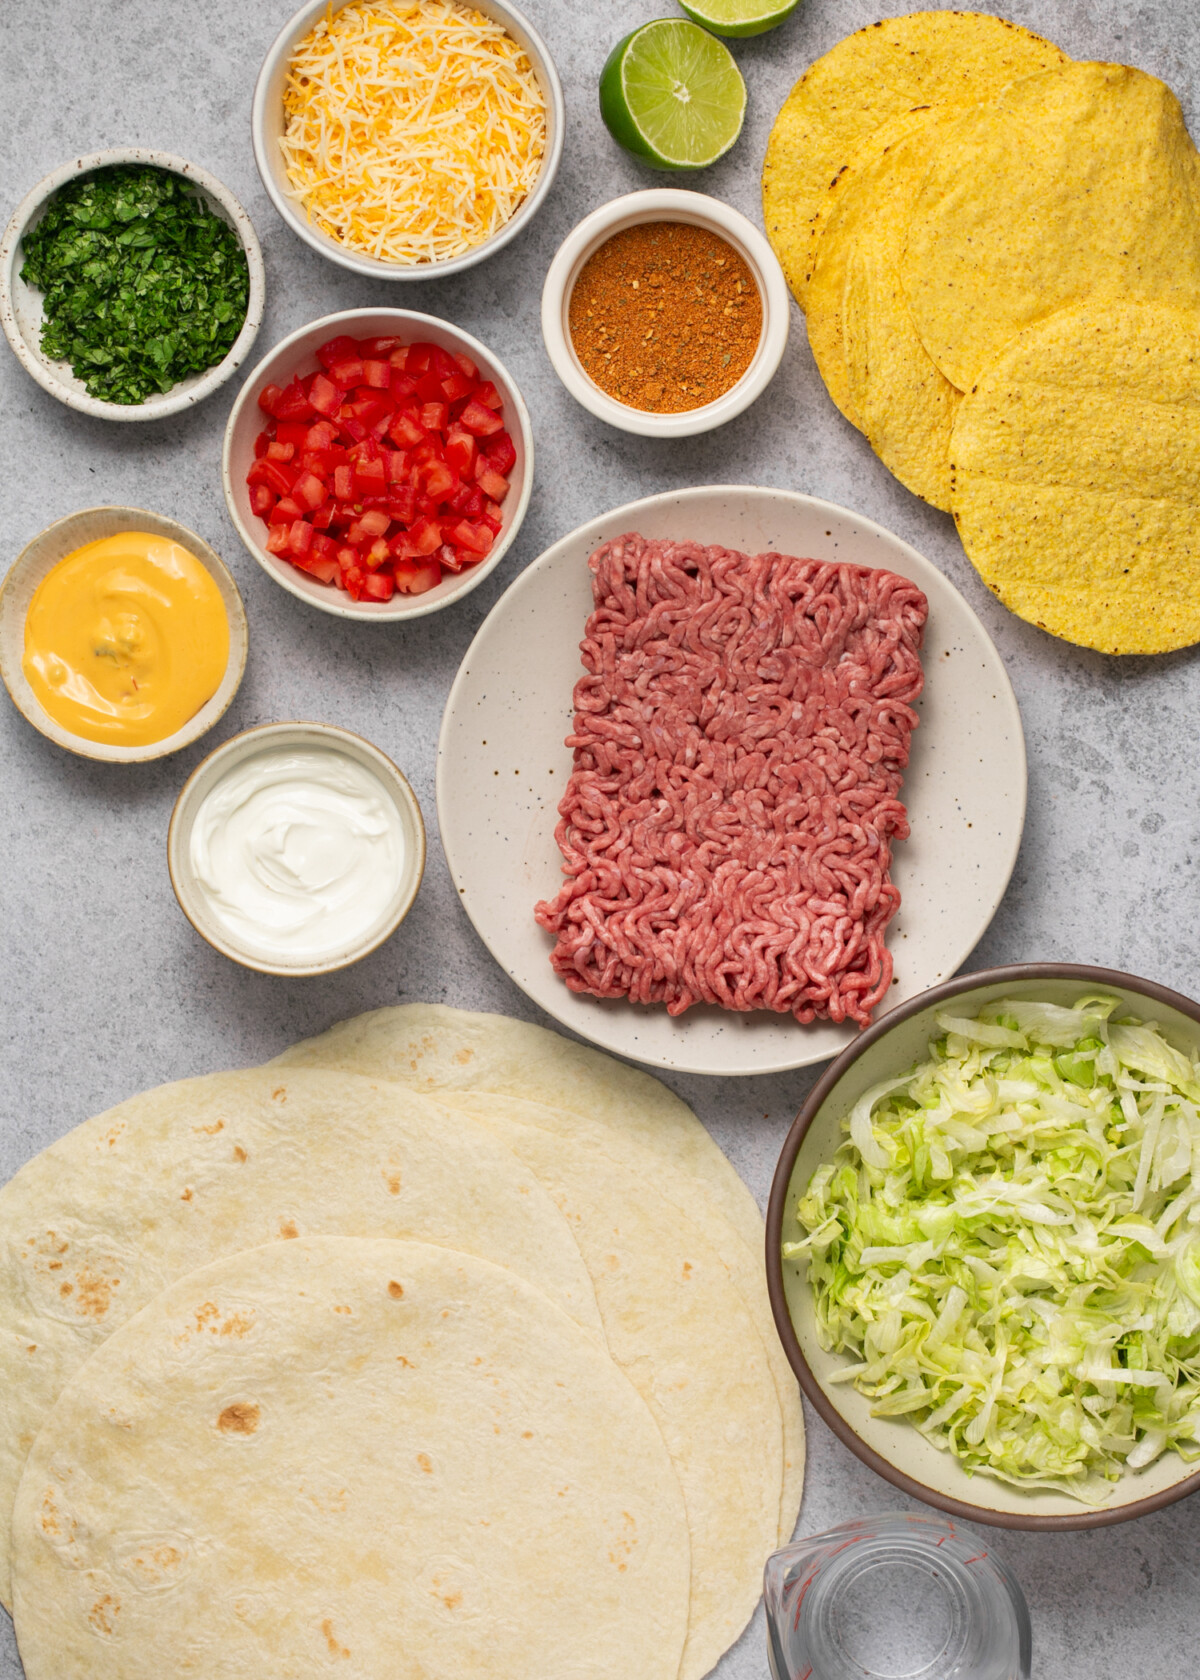 Ingredients needed for recipe including beef, tostadas, queso, cheese, tomatoes, taco seasoning, lime, cilantro, tortillas, lettuce, and sour cream